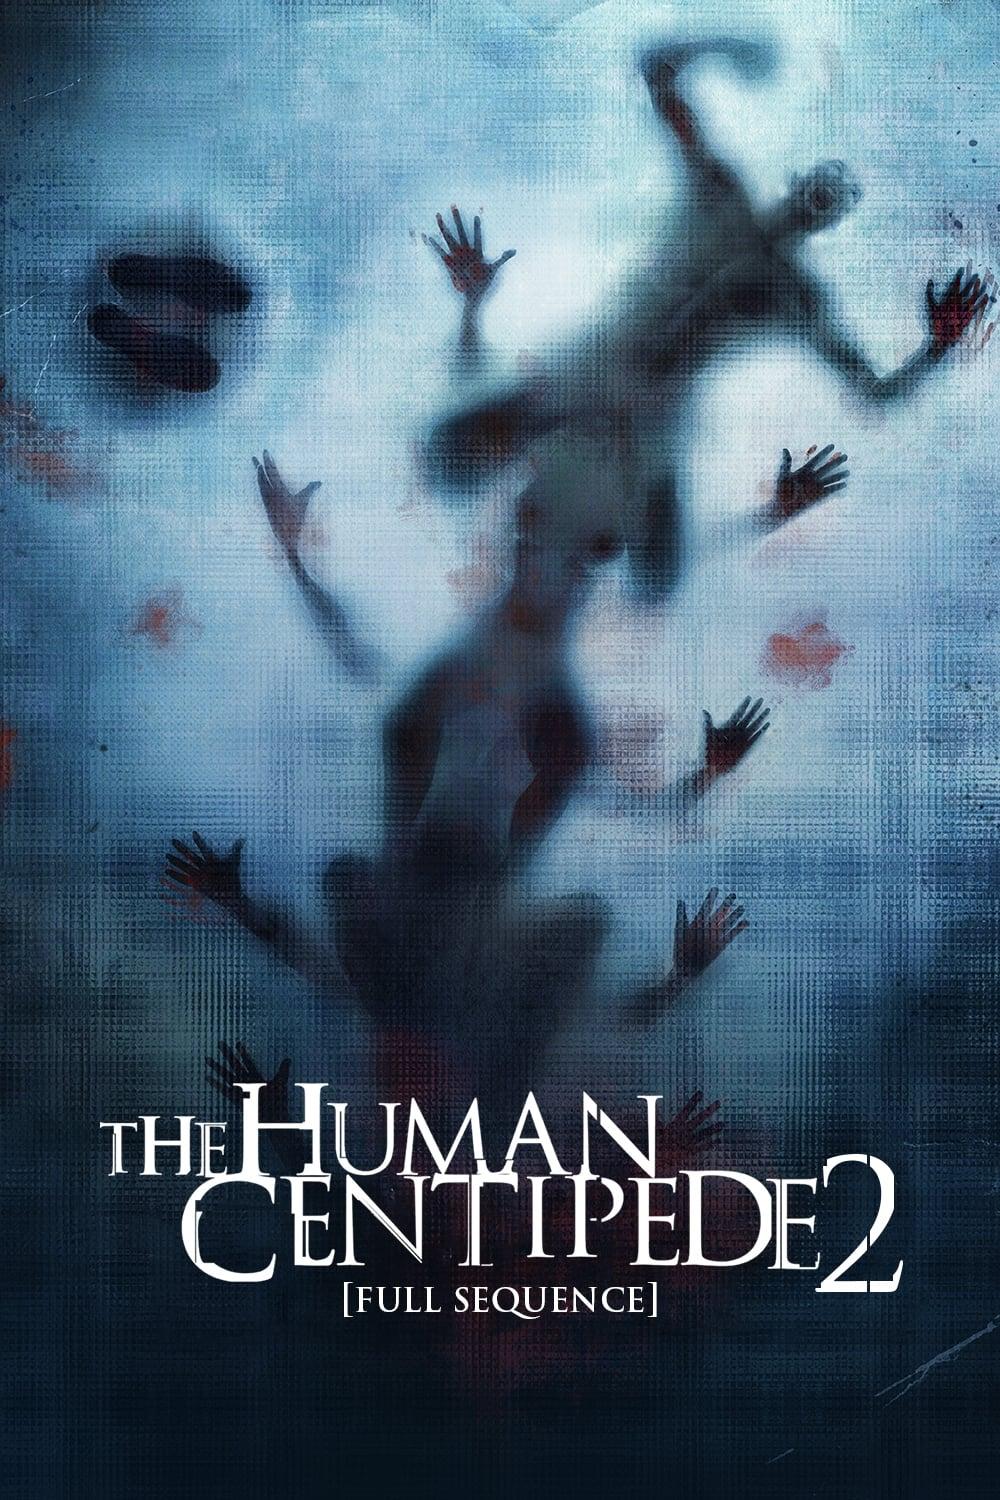 The Human Centipede 2 (Full Sequence) poster